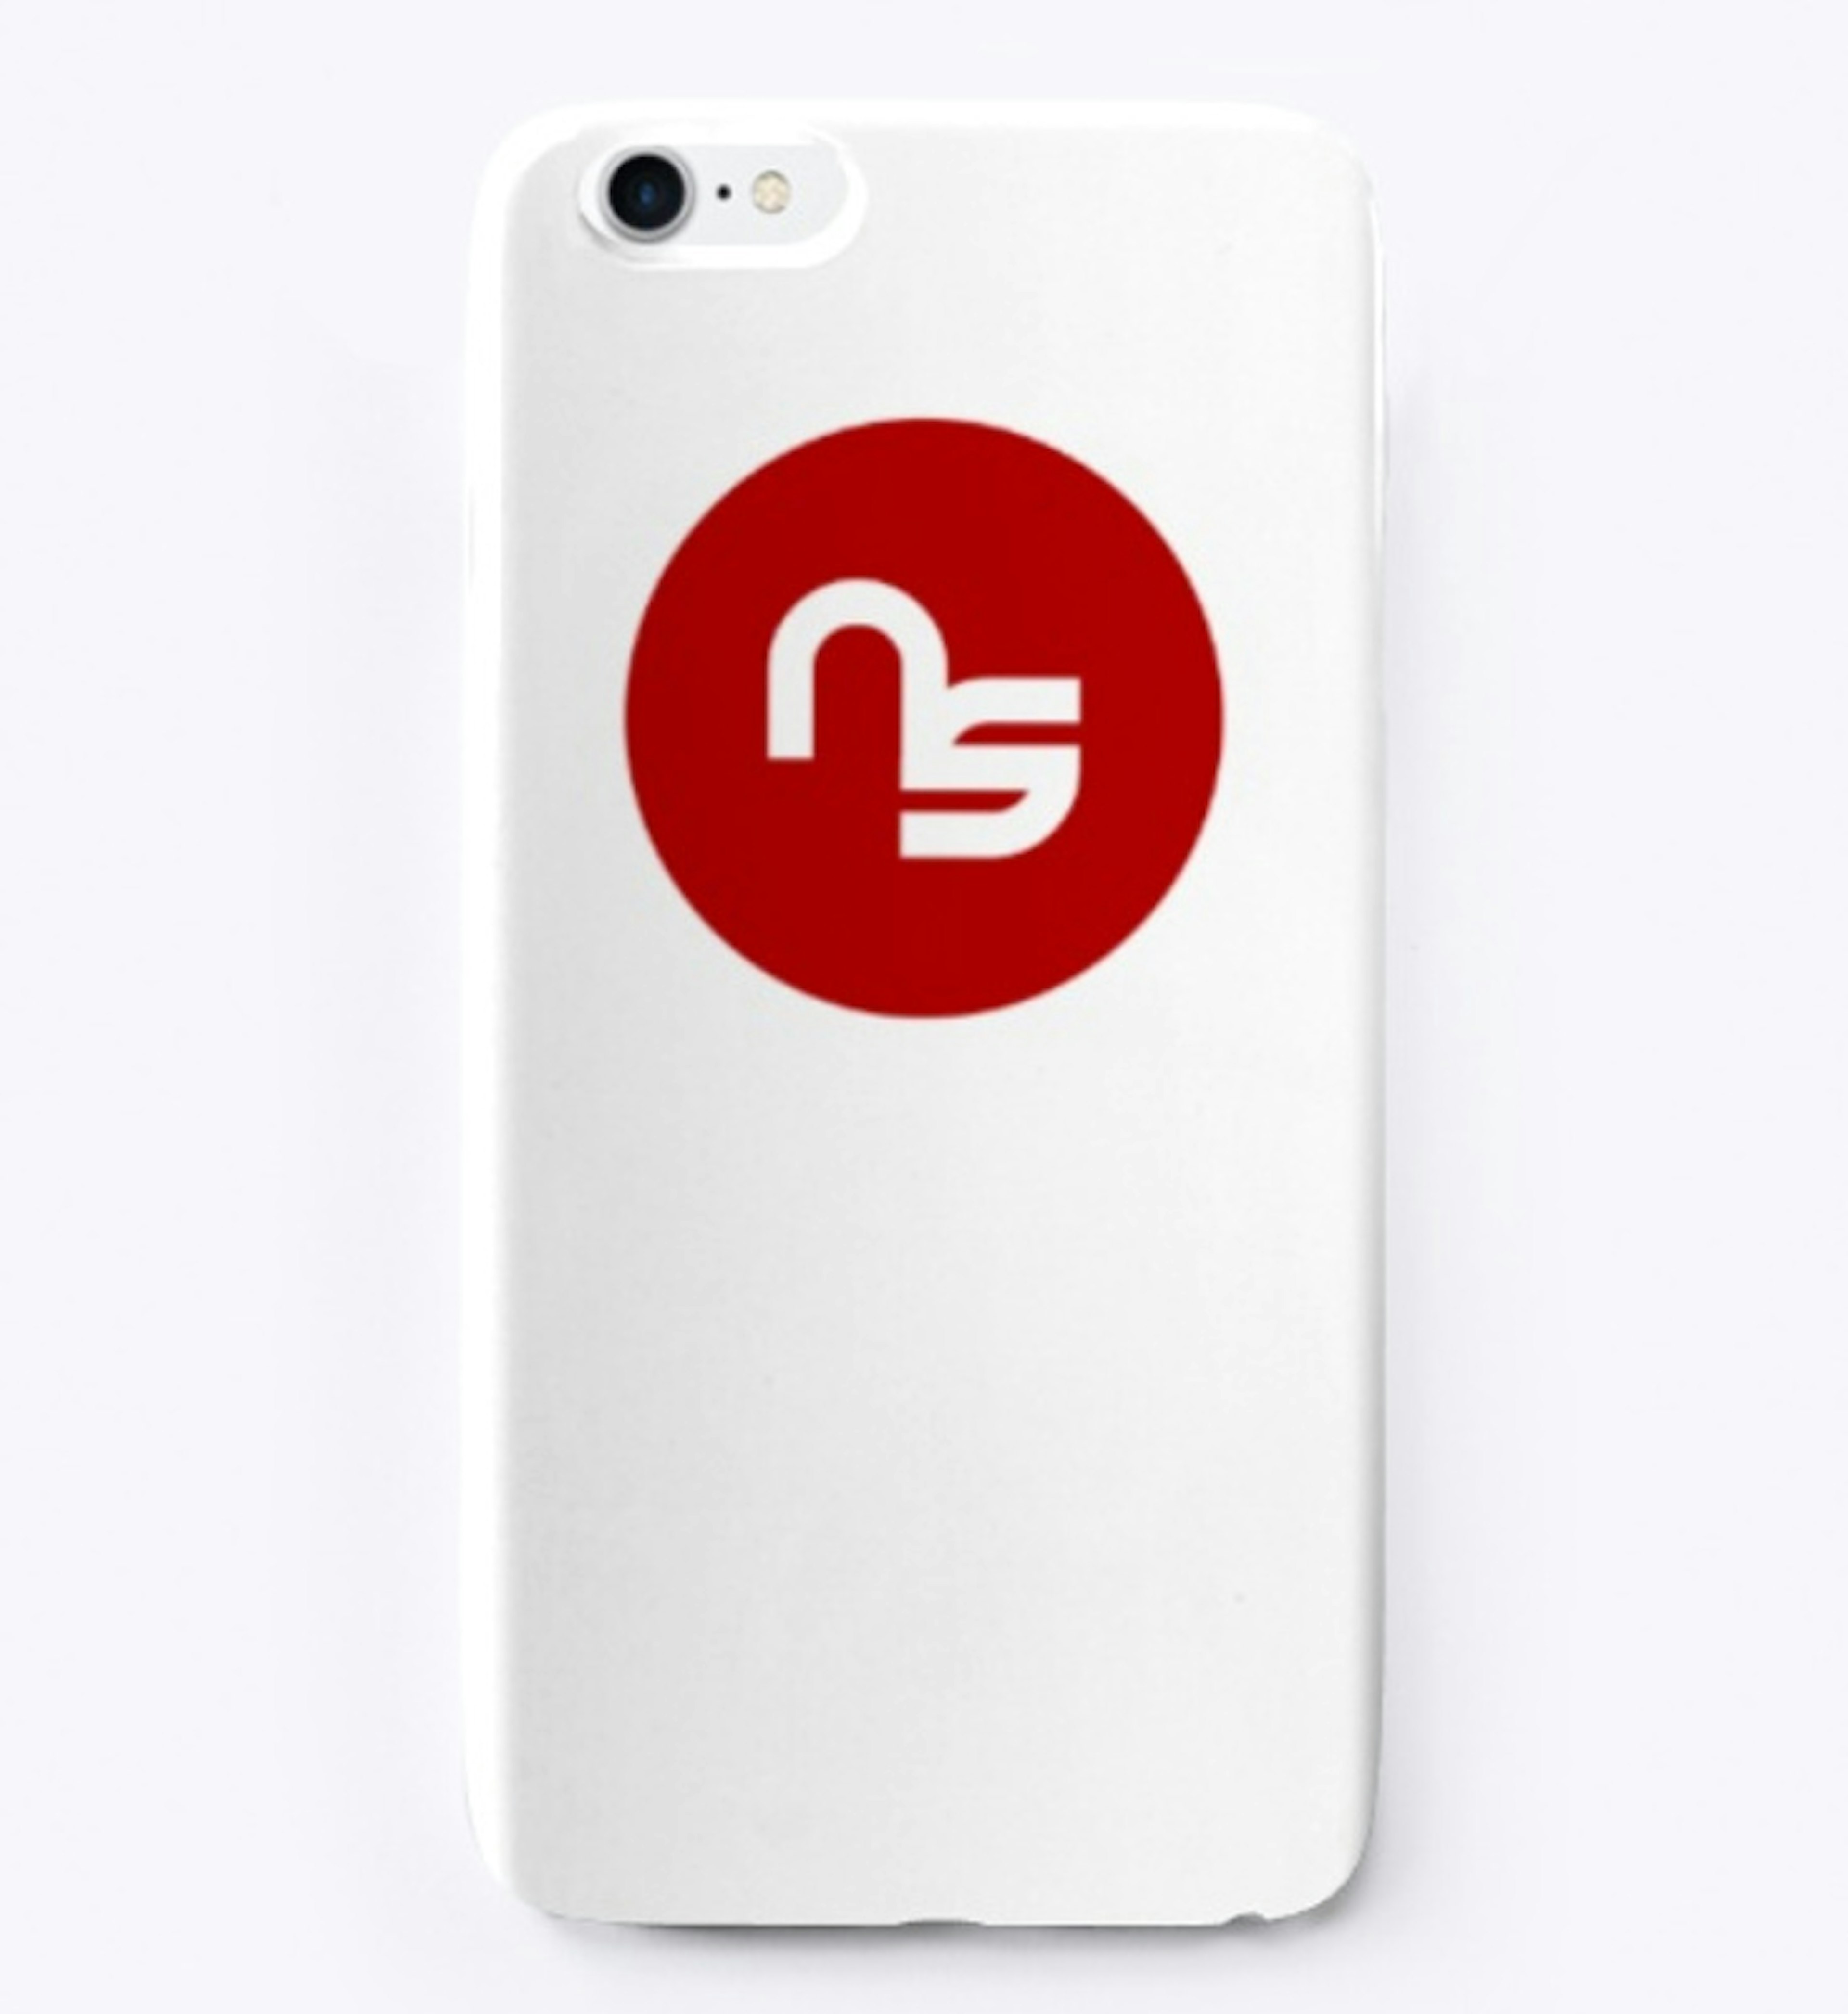 NS Phone Case for iPhone (White)